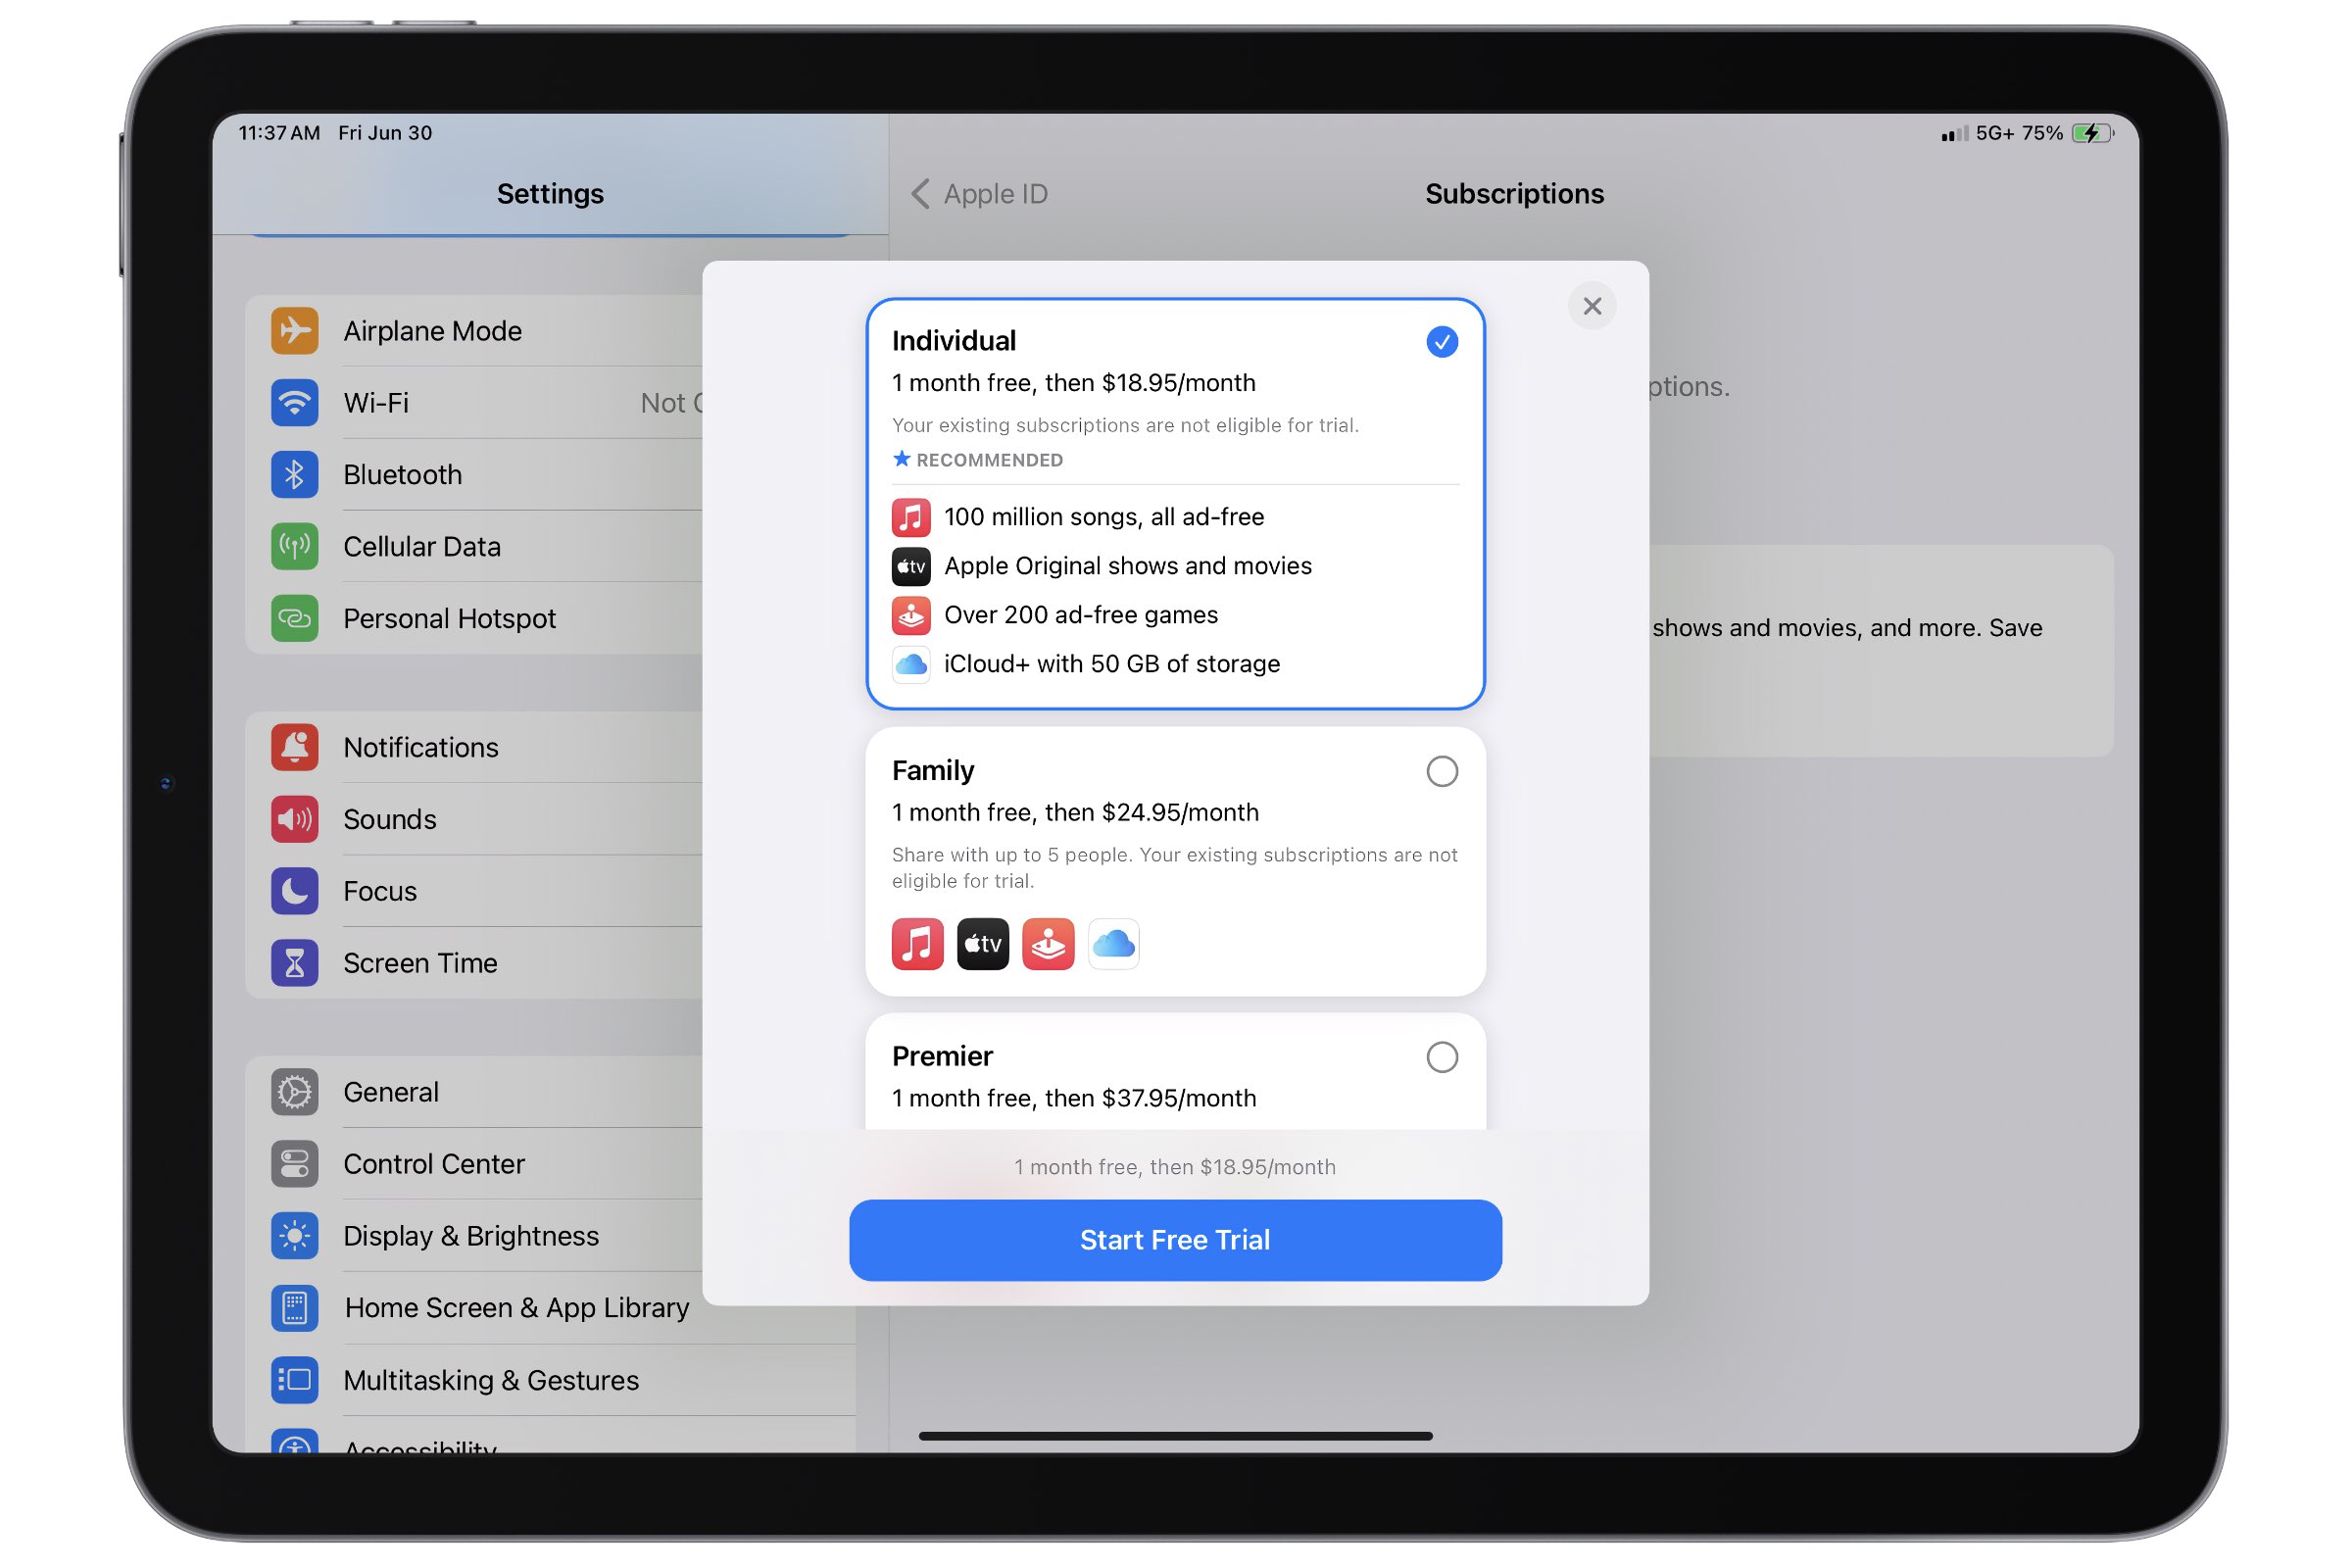 How to sync your iPhone with your iPad for seamless use